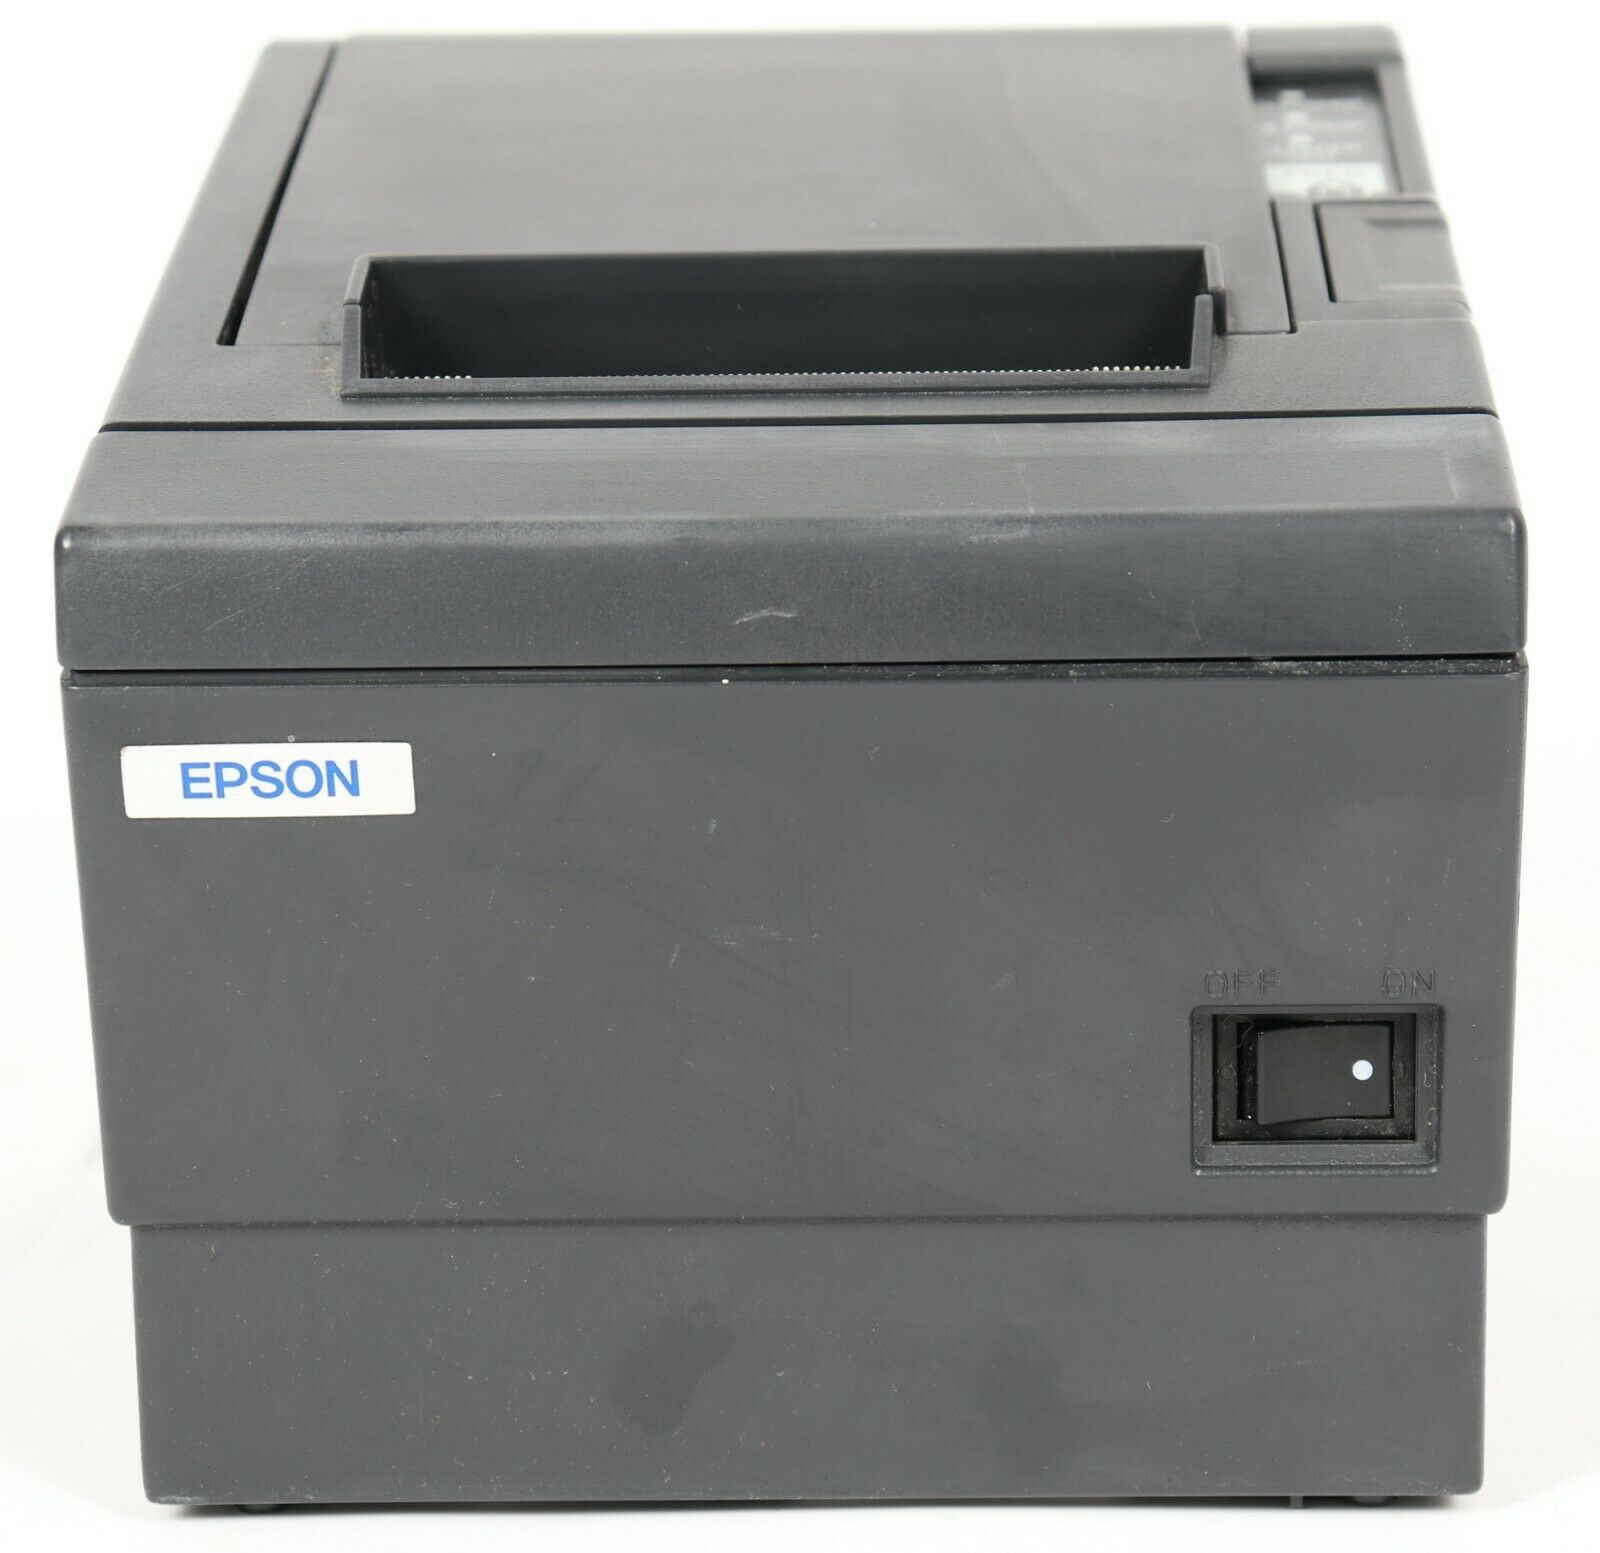 Epson Tm-t88iii Pos Point Of Sale Thermal Usb Receipt Printer M129c No Acadapter